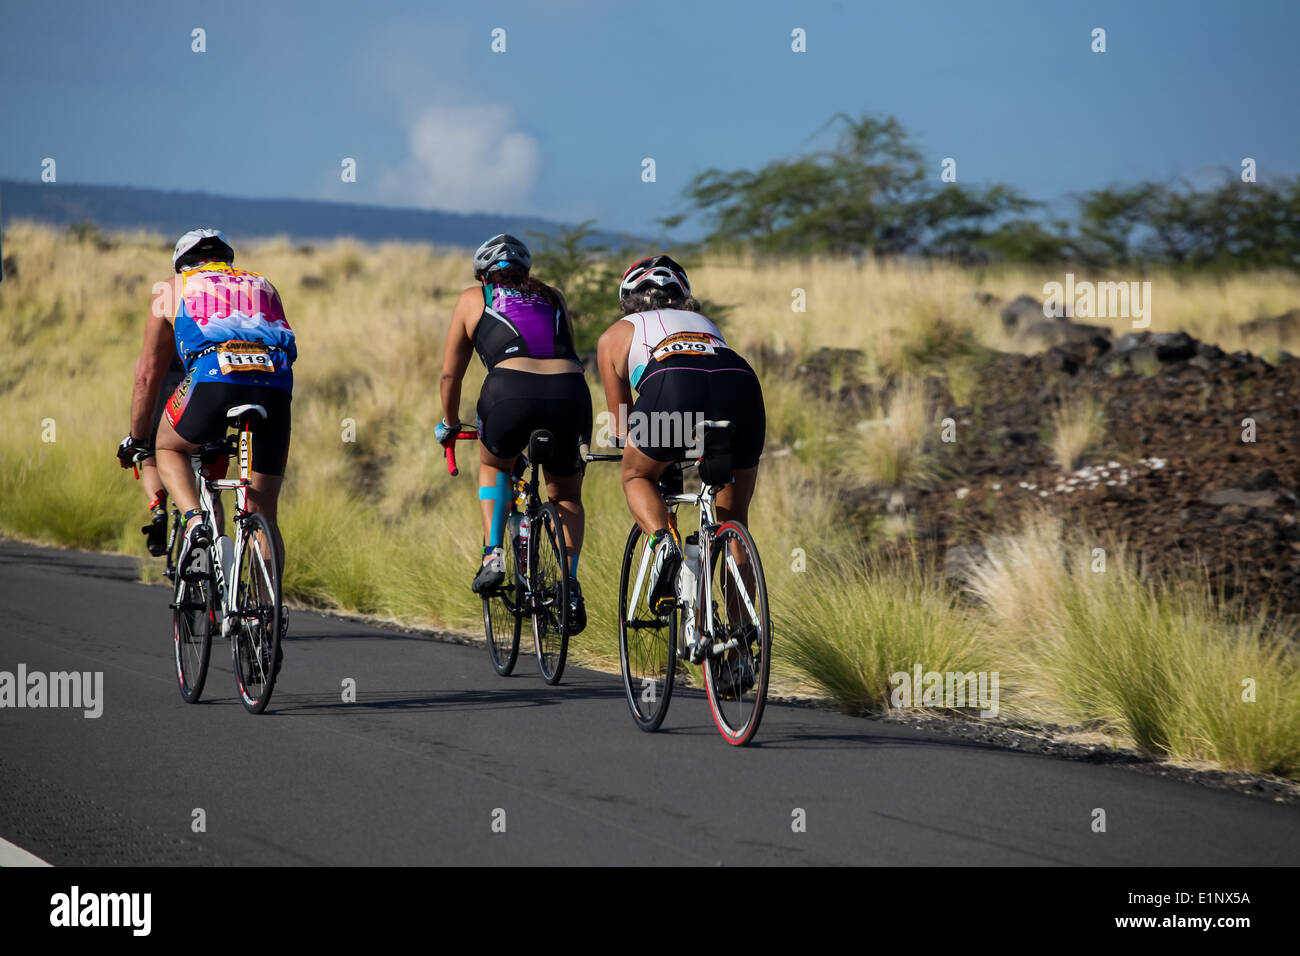 Unidentified cyclers on the Lavaman Triathlon in Waikoloa, Hawaii. It is held in Olympics format: 1.5 km swimming, 40 km biking and 10 km running. Stock Photo